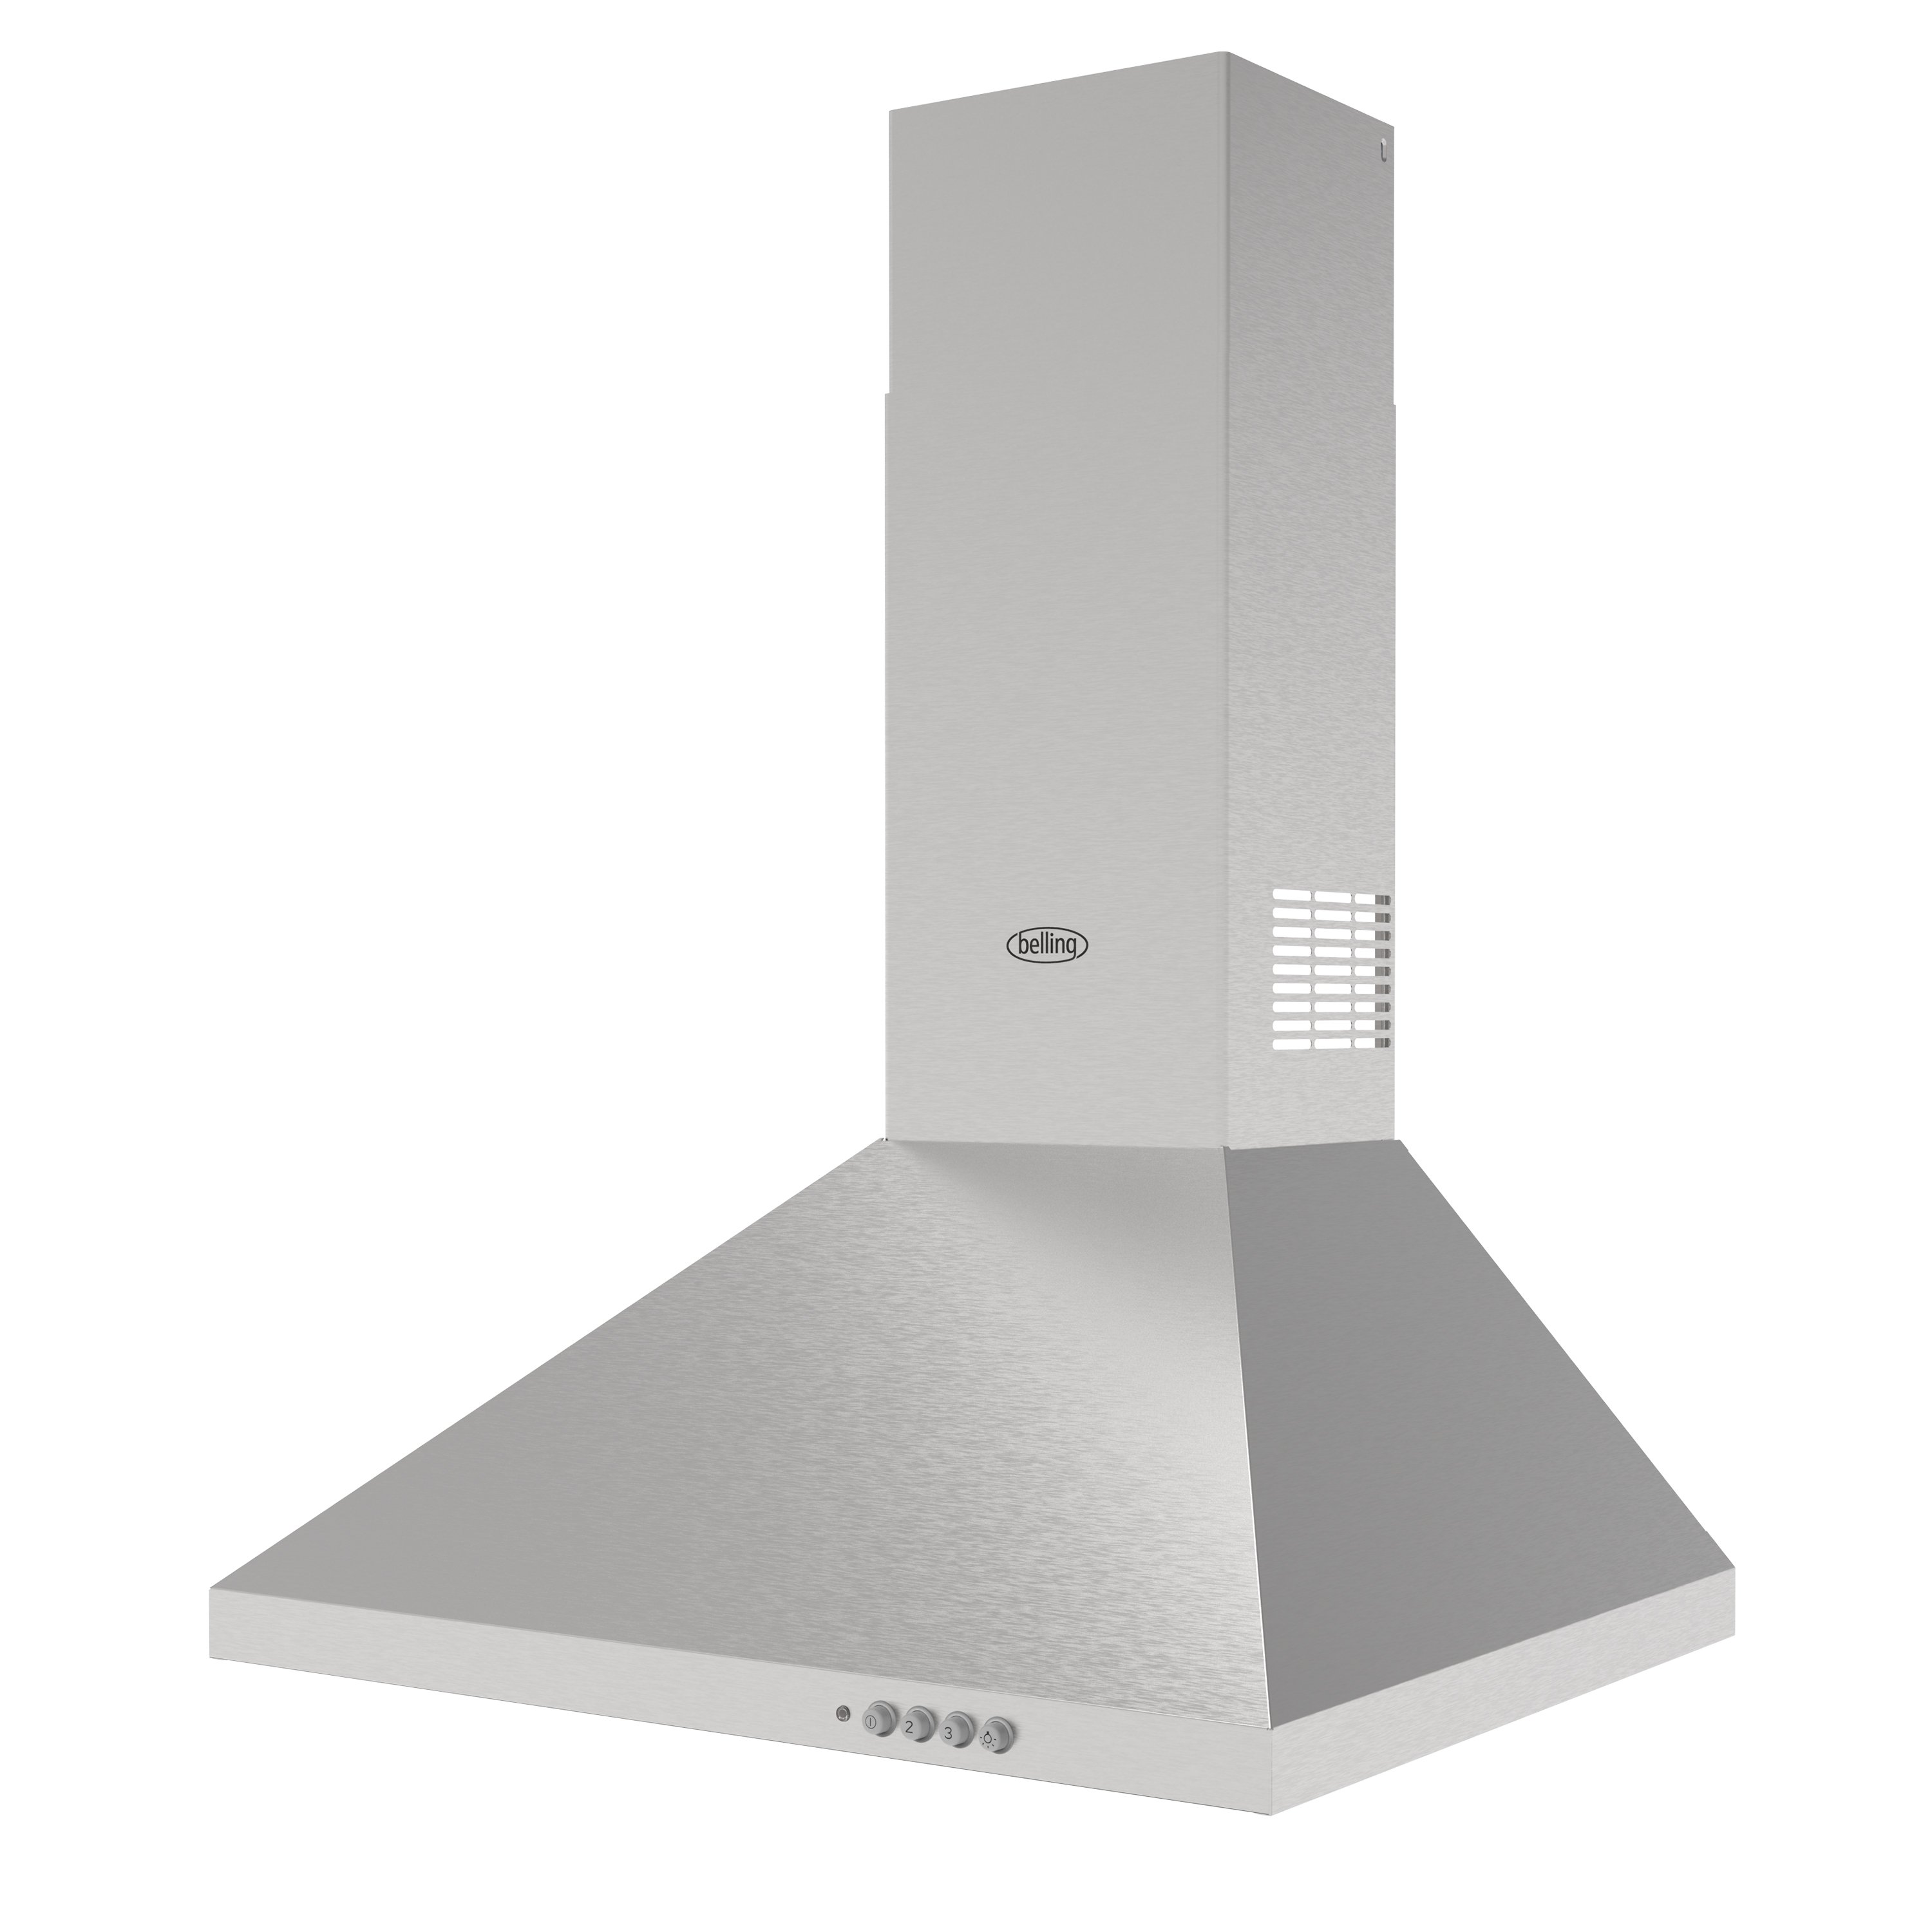 60cm Chimney hood with 3 fan speeds, 2 LED lights, 2 washable grease filters and extendable chimney section